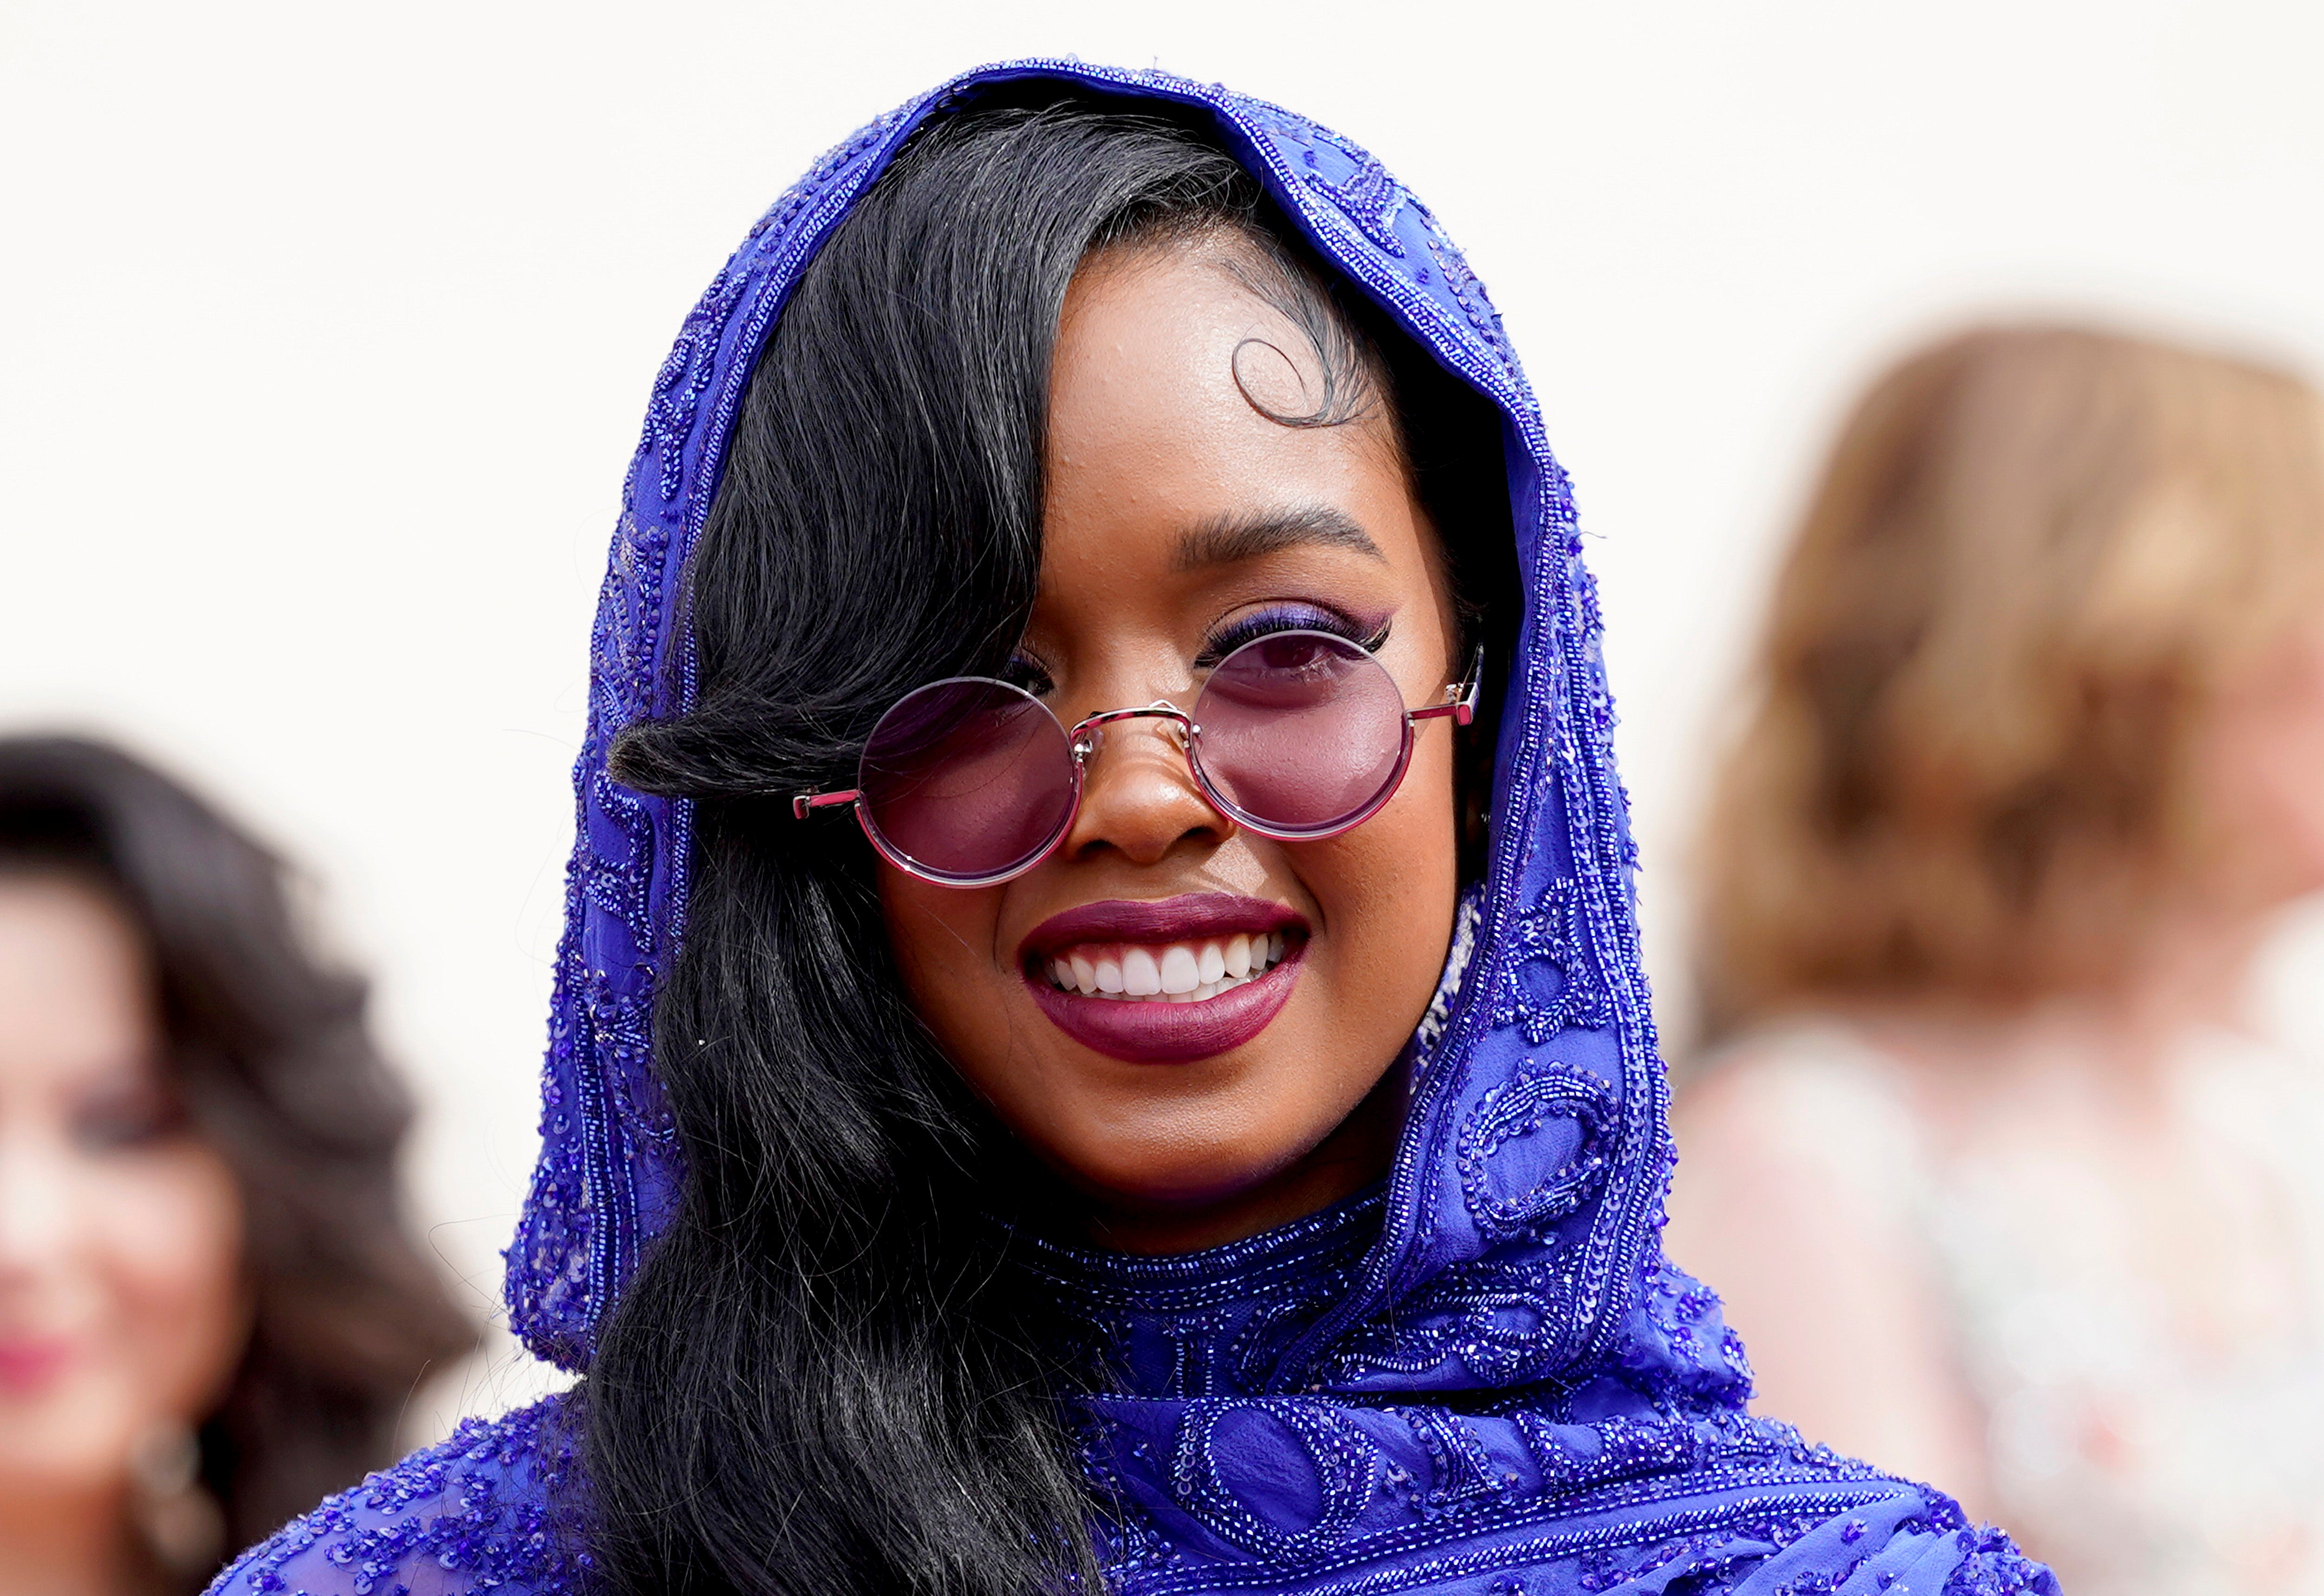 Oscars 2021: H.E.R. Says There Will Be an EGOT In Her Future